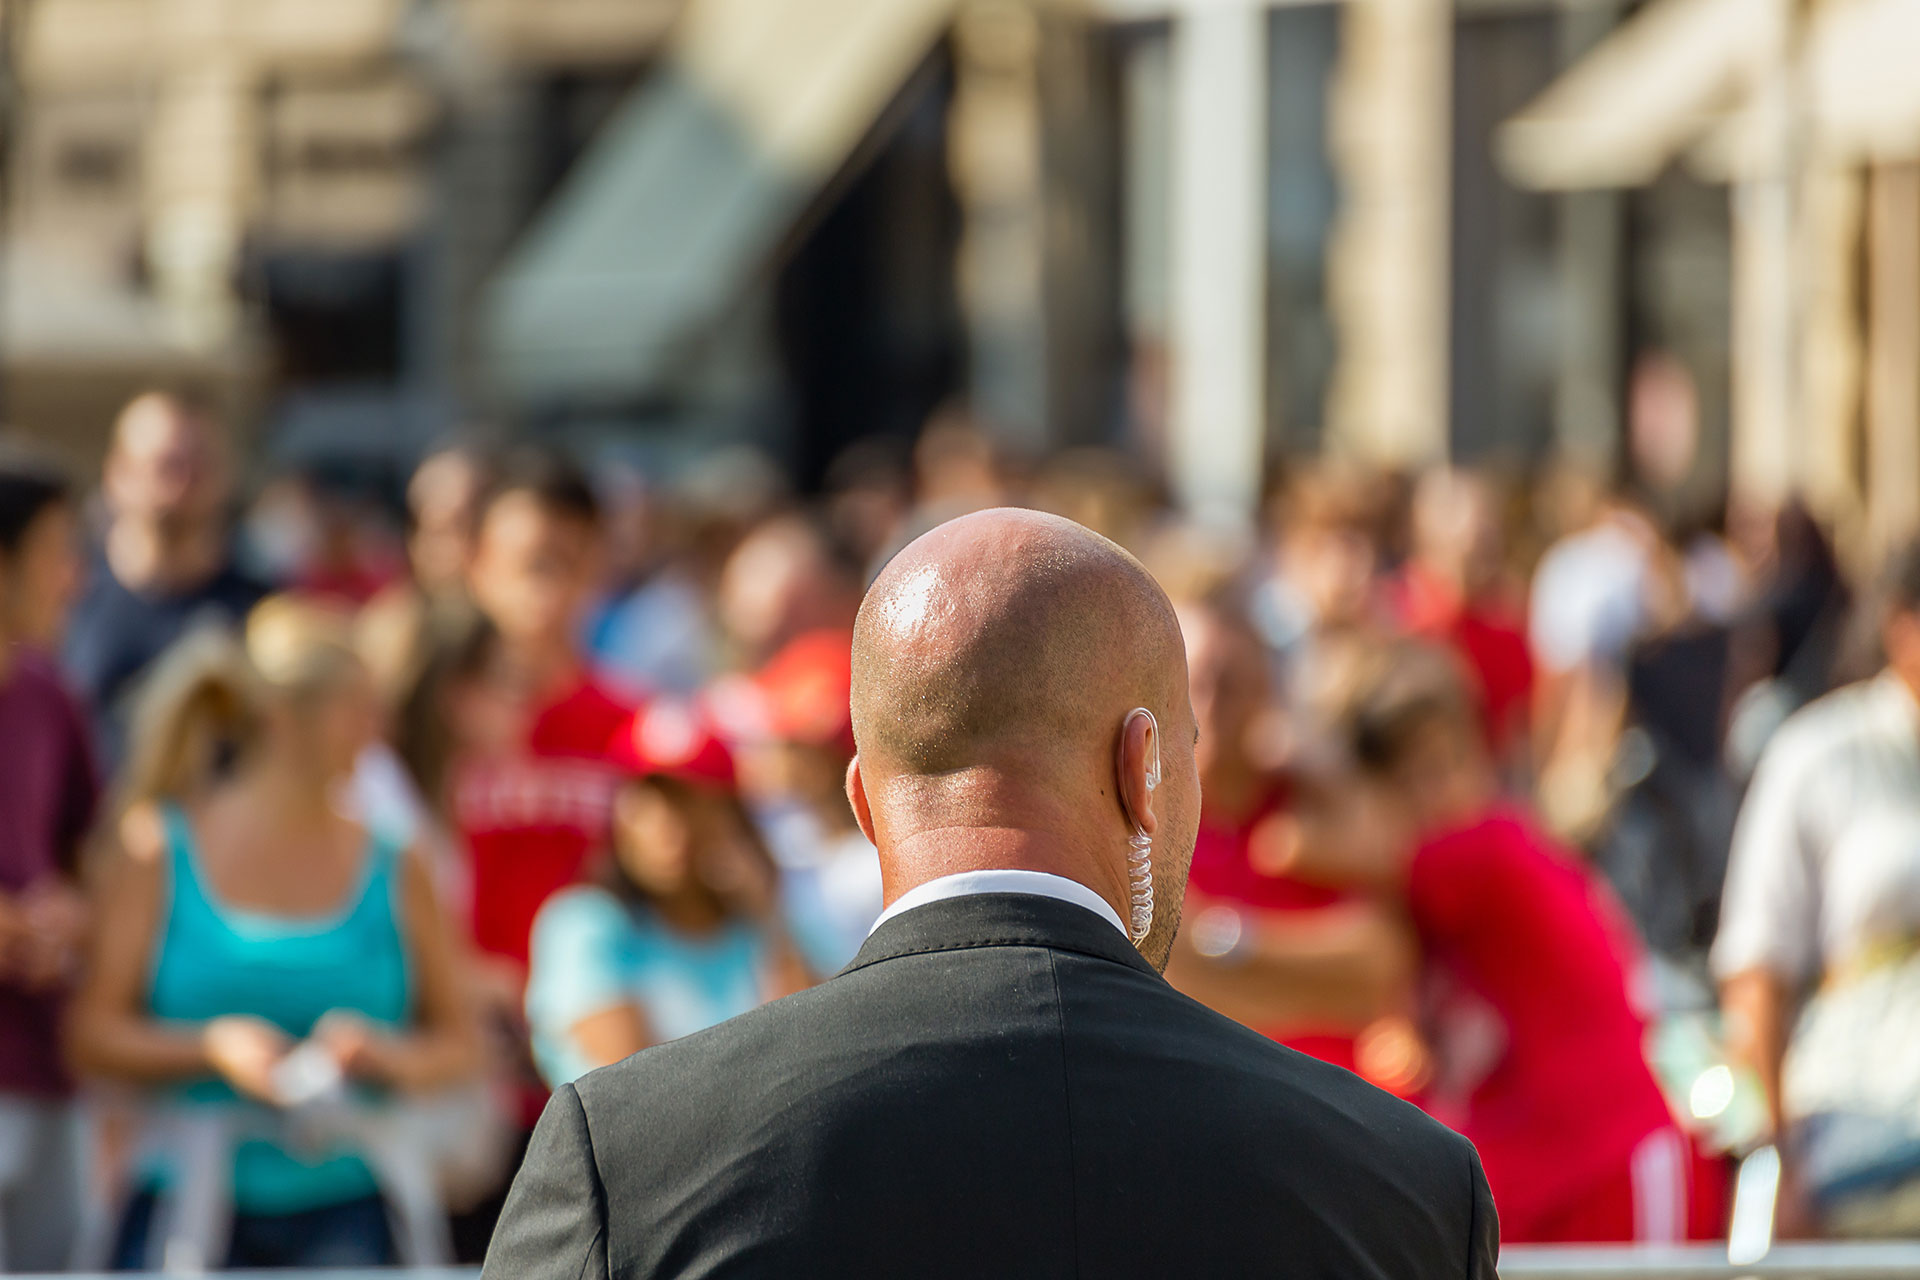 Security Guard in a suit watching a crowd at an event